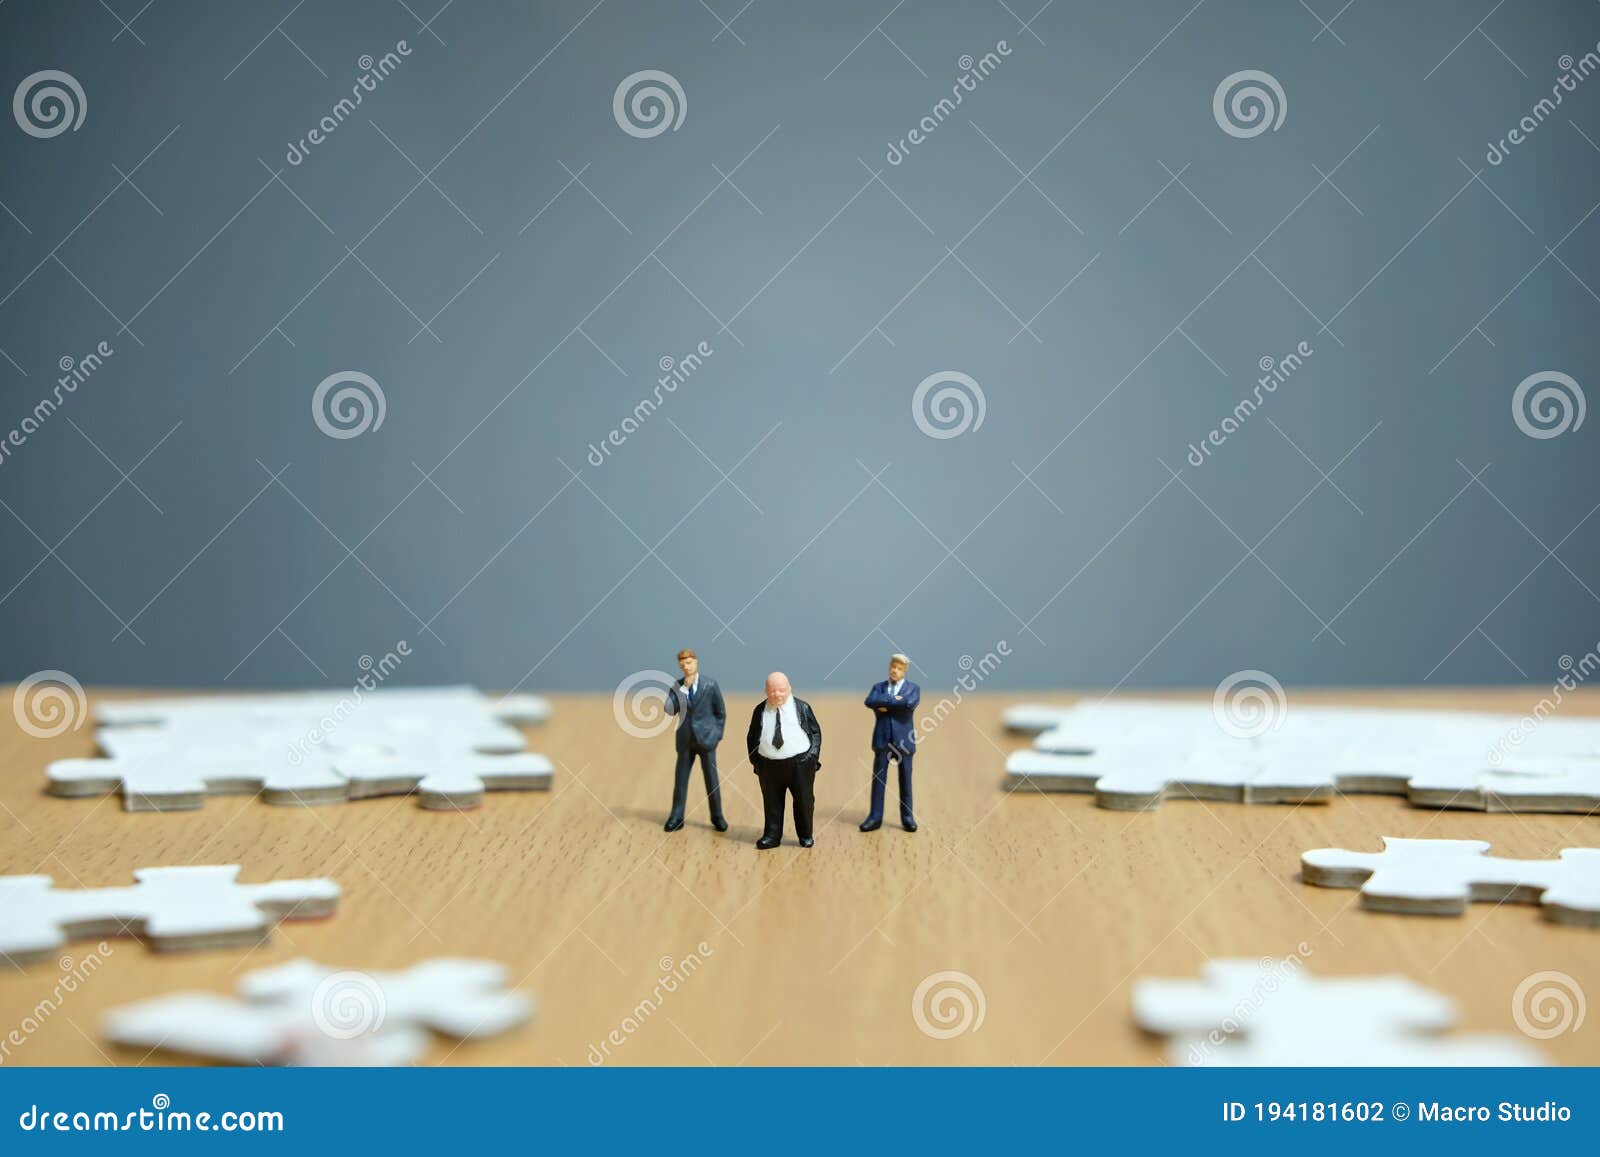 miniature people businessmen standing in front of uncomplete jigsaw puzzles